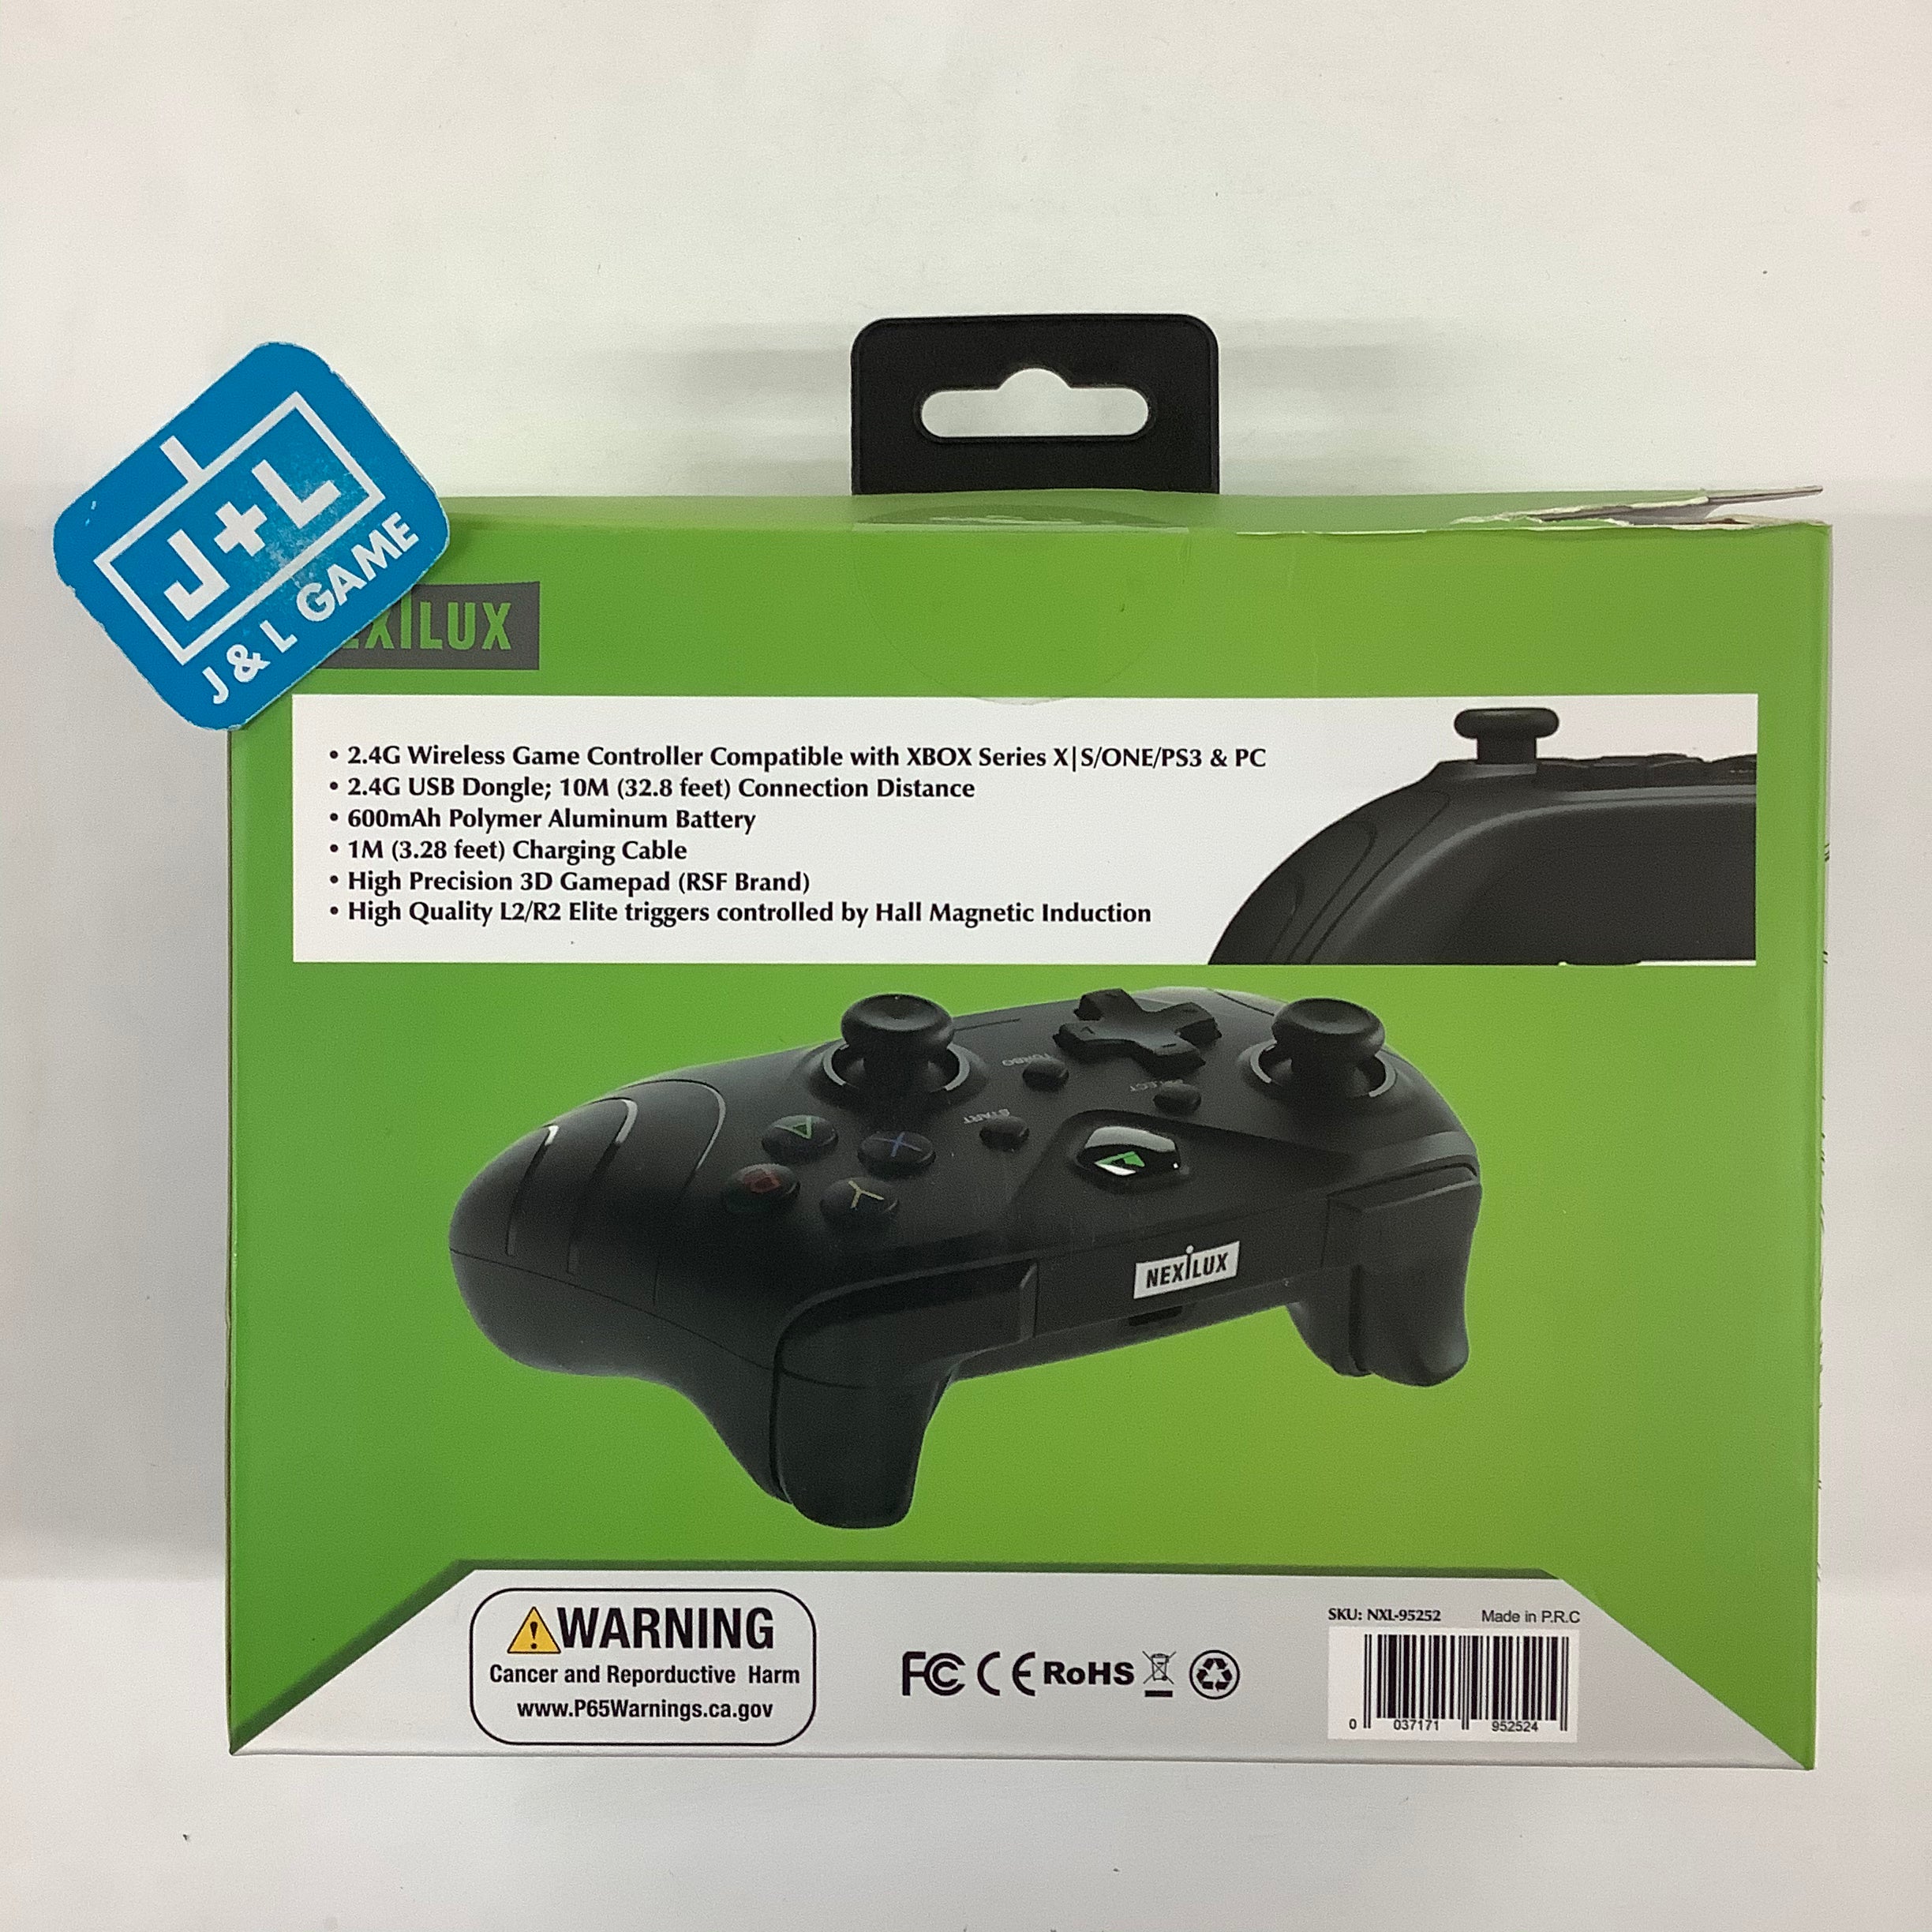 WIRELESS 4 in 1 GAME CONTROLLER COMPATIBLE WITH XBOX Series X | S / ONE / PS3 & PC Accessories NEXILUX   